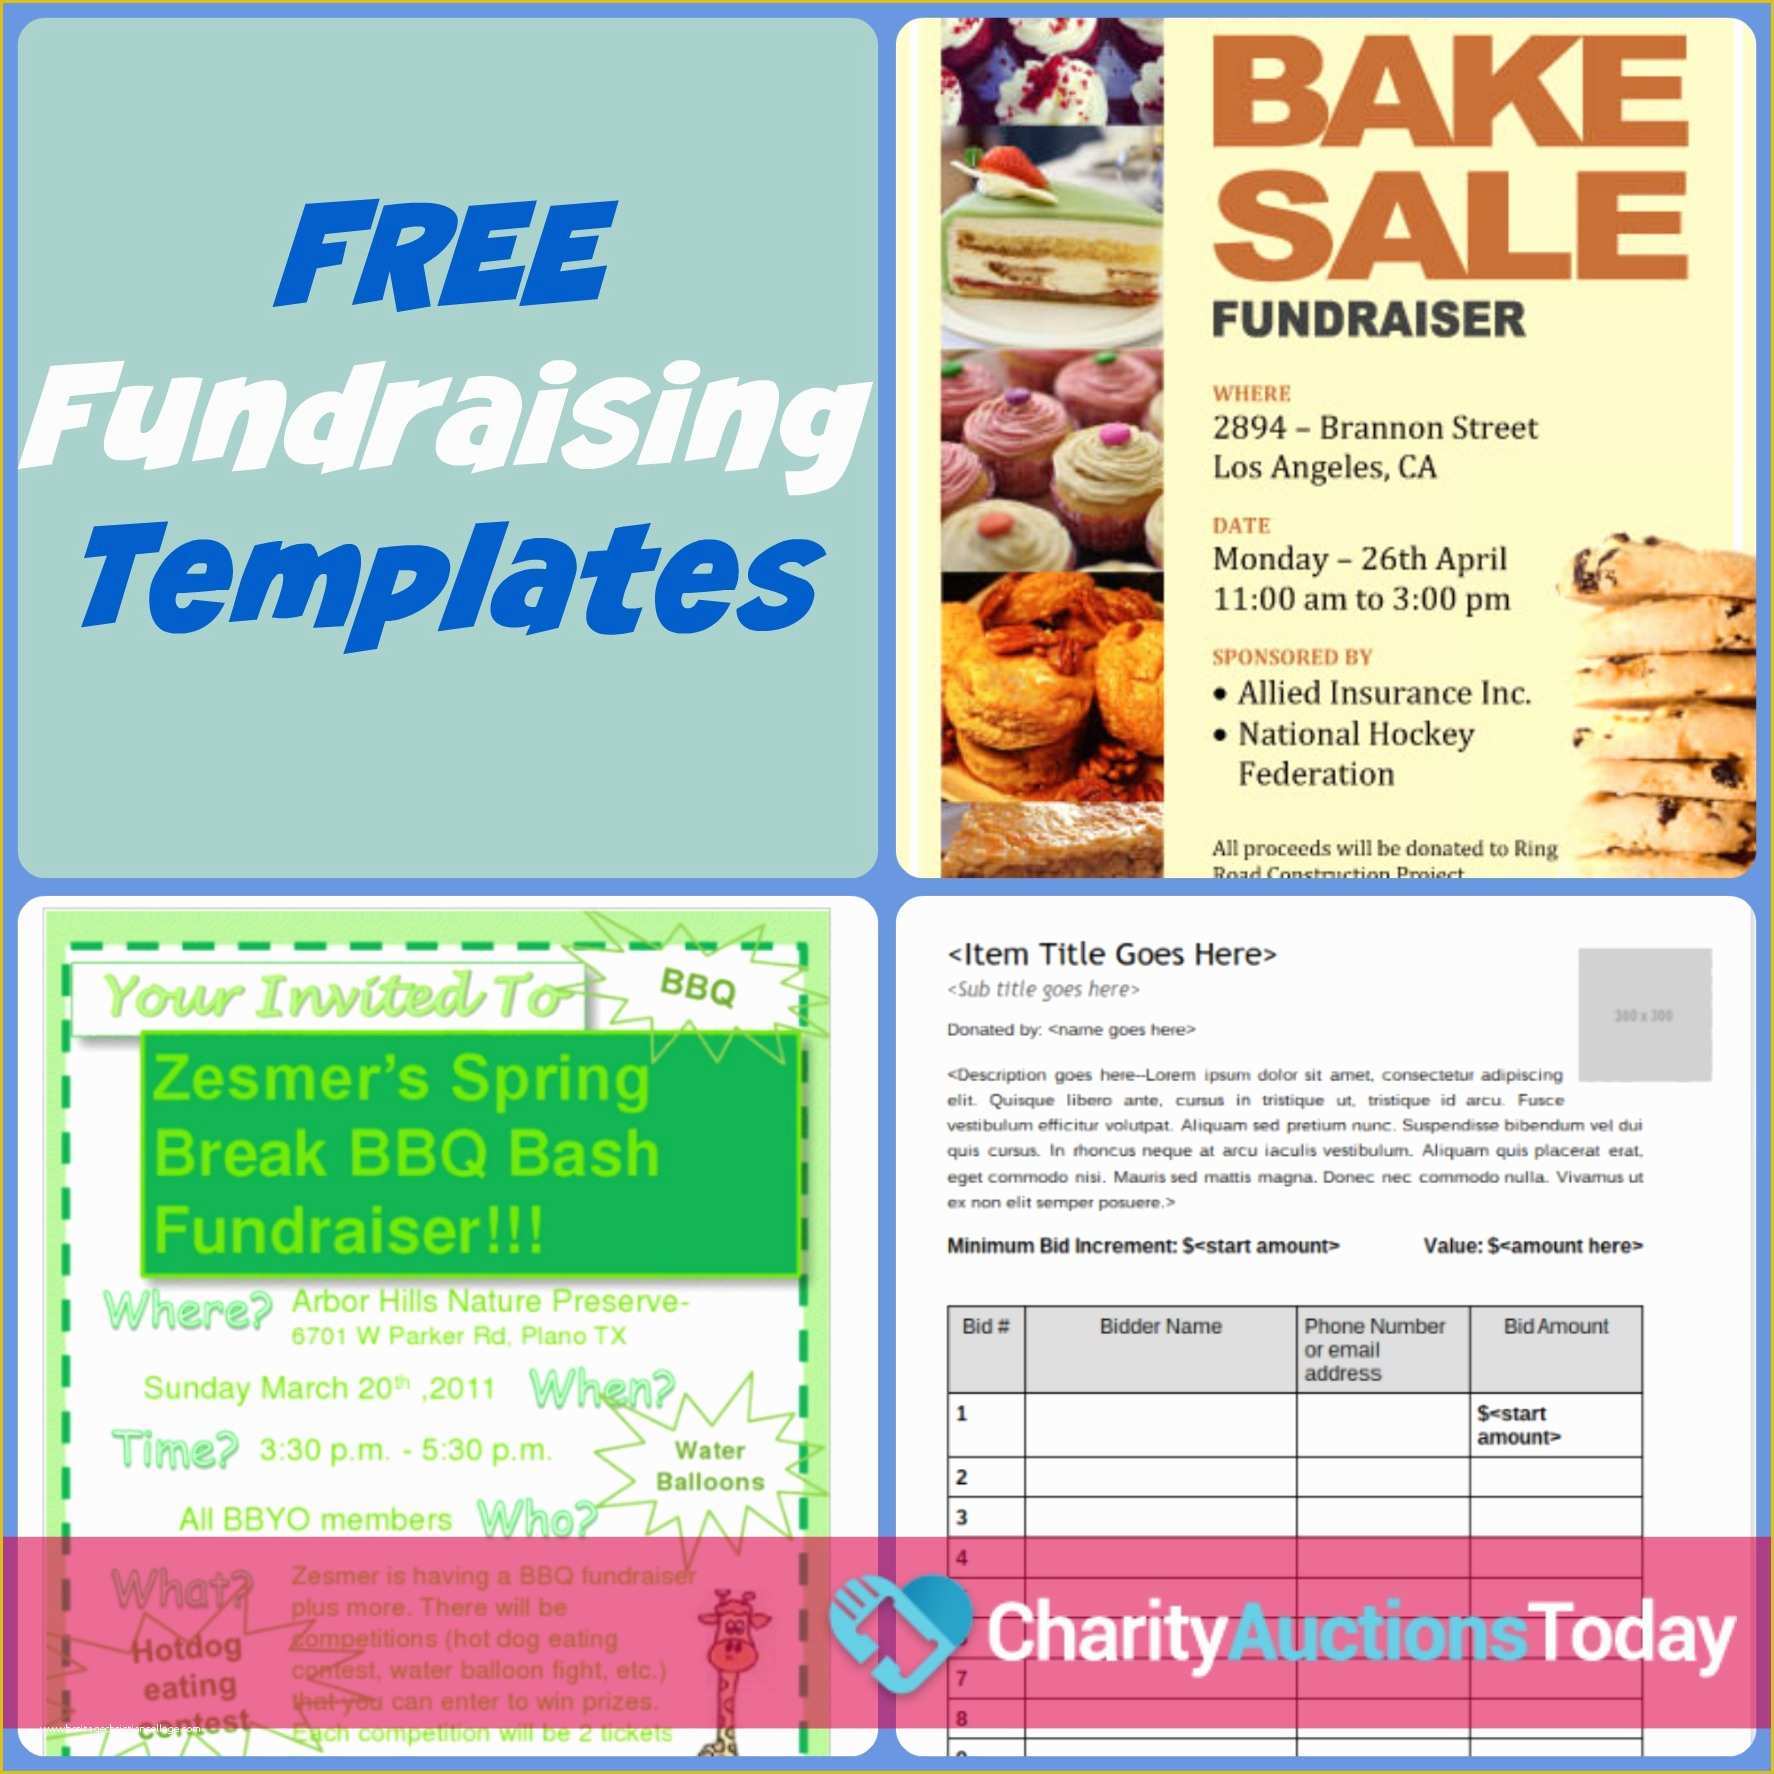 Free Race Flyer Template Of Free Fundraiser Flyer Charity Auctions today and Free Race